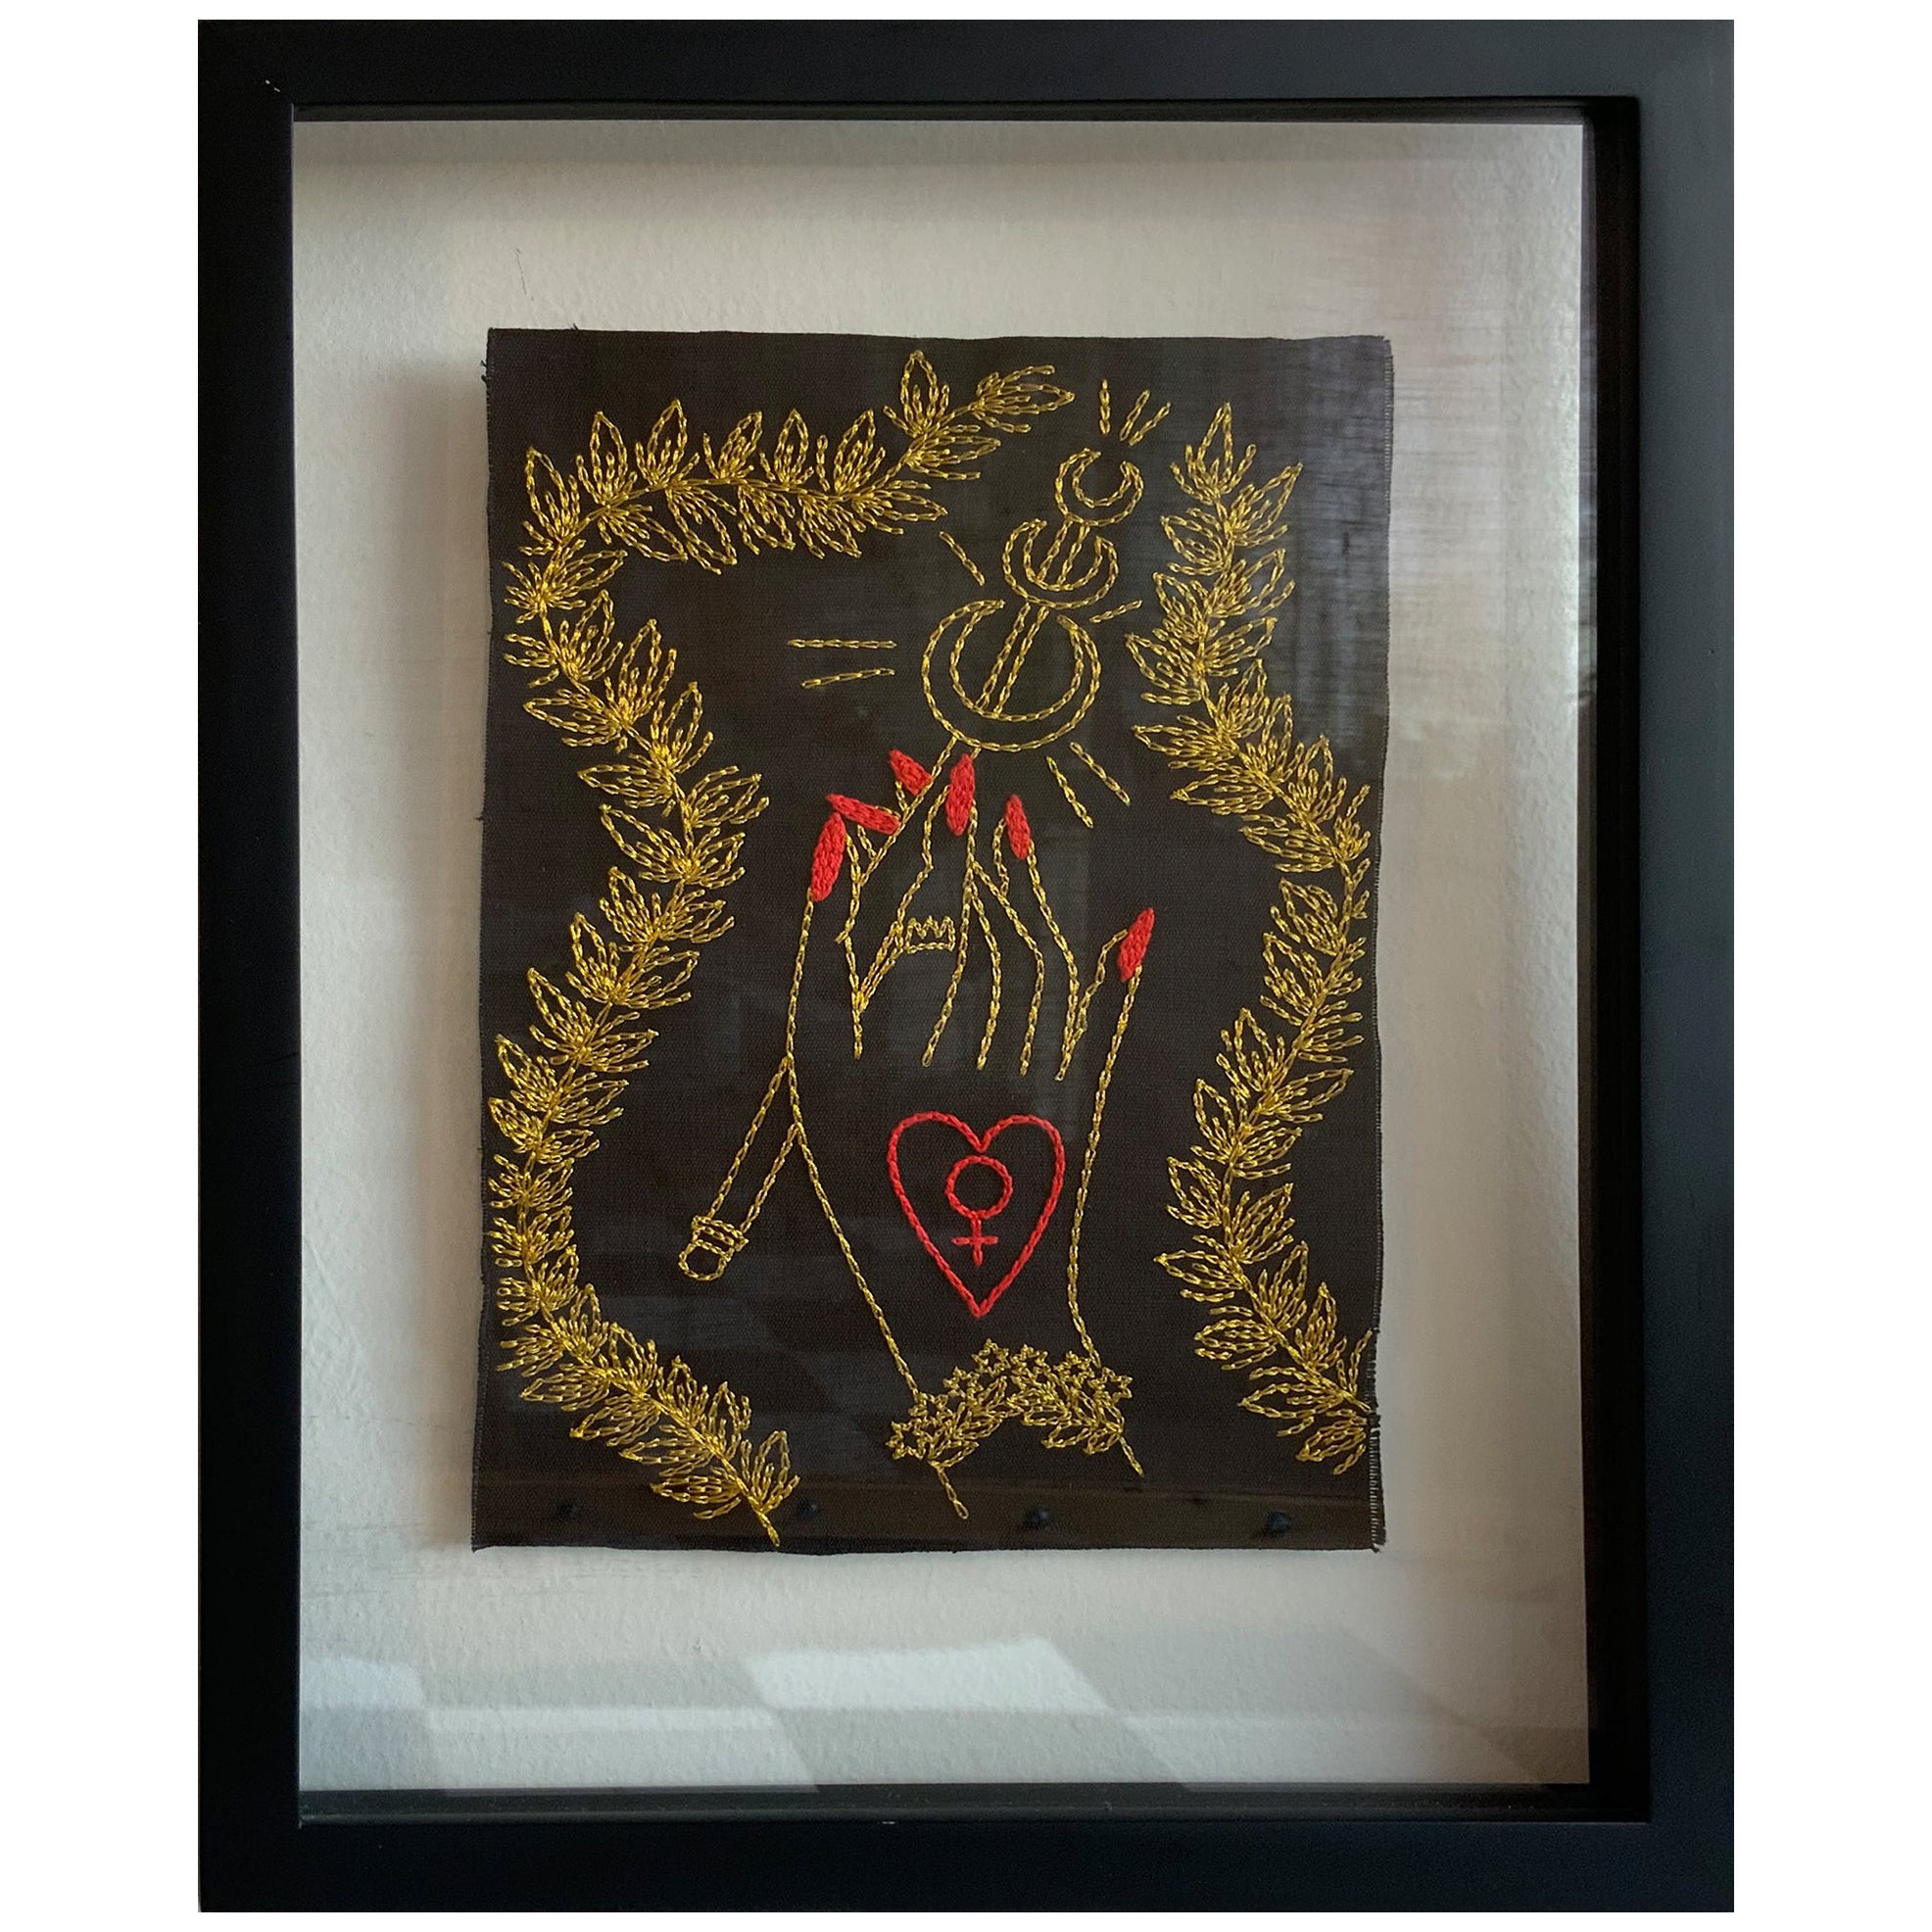 La Emperatriz. From The Ventura Series.  Embroidery thread on canvas. Framed For Sale